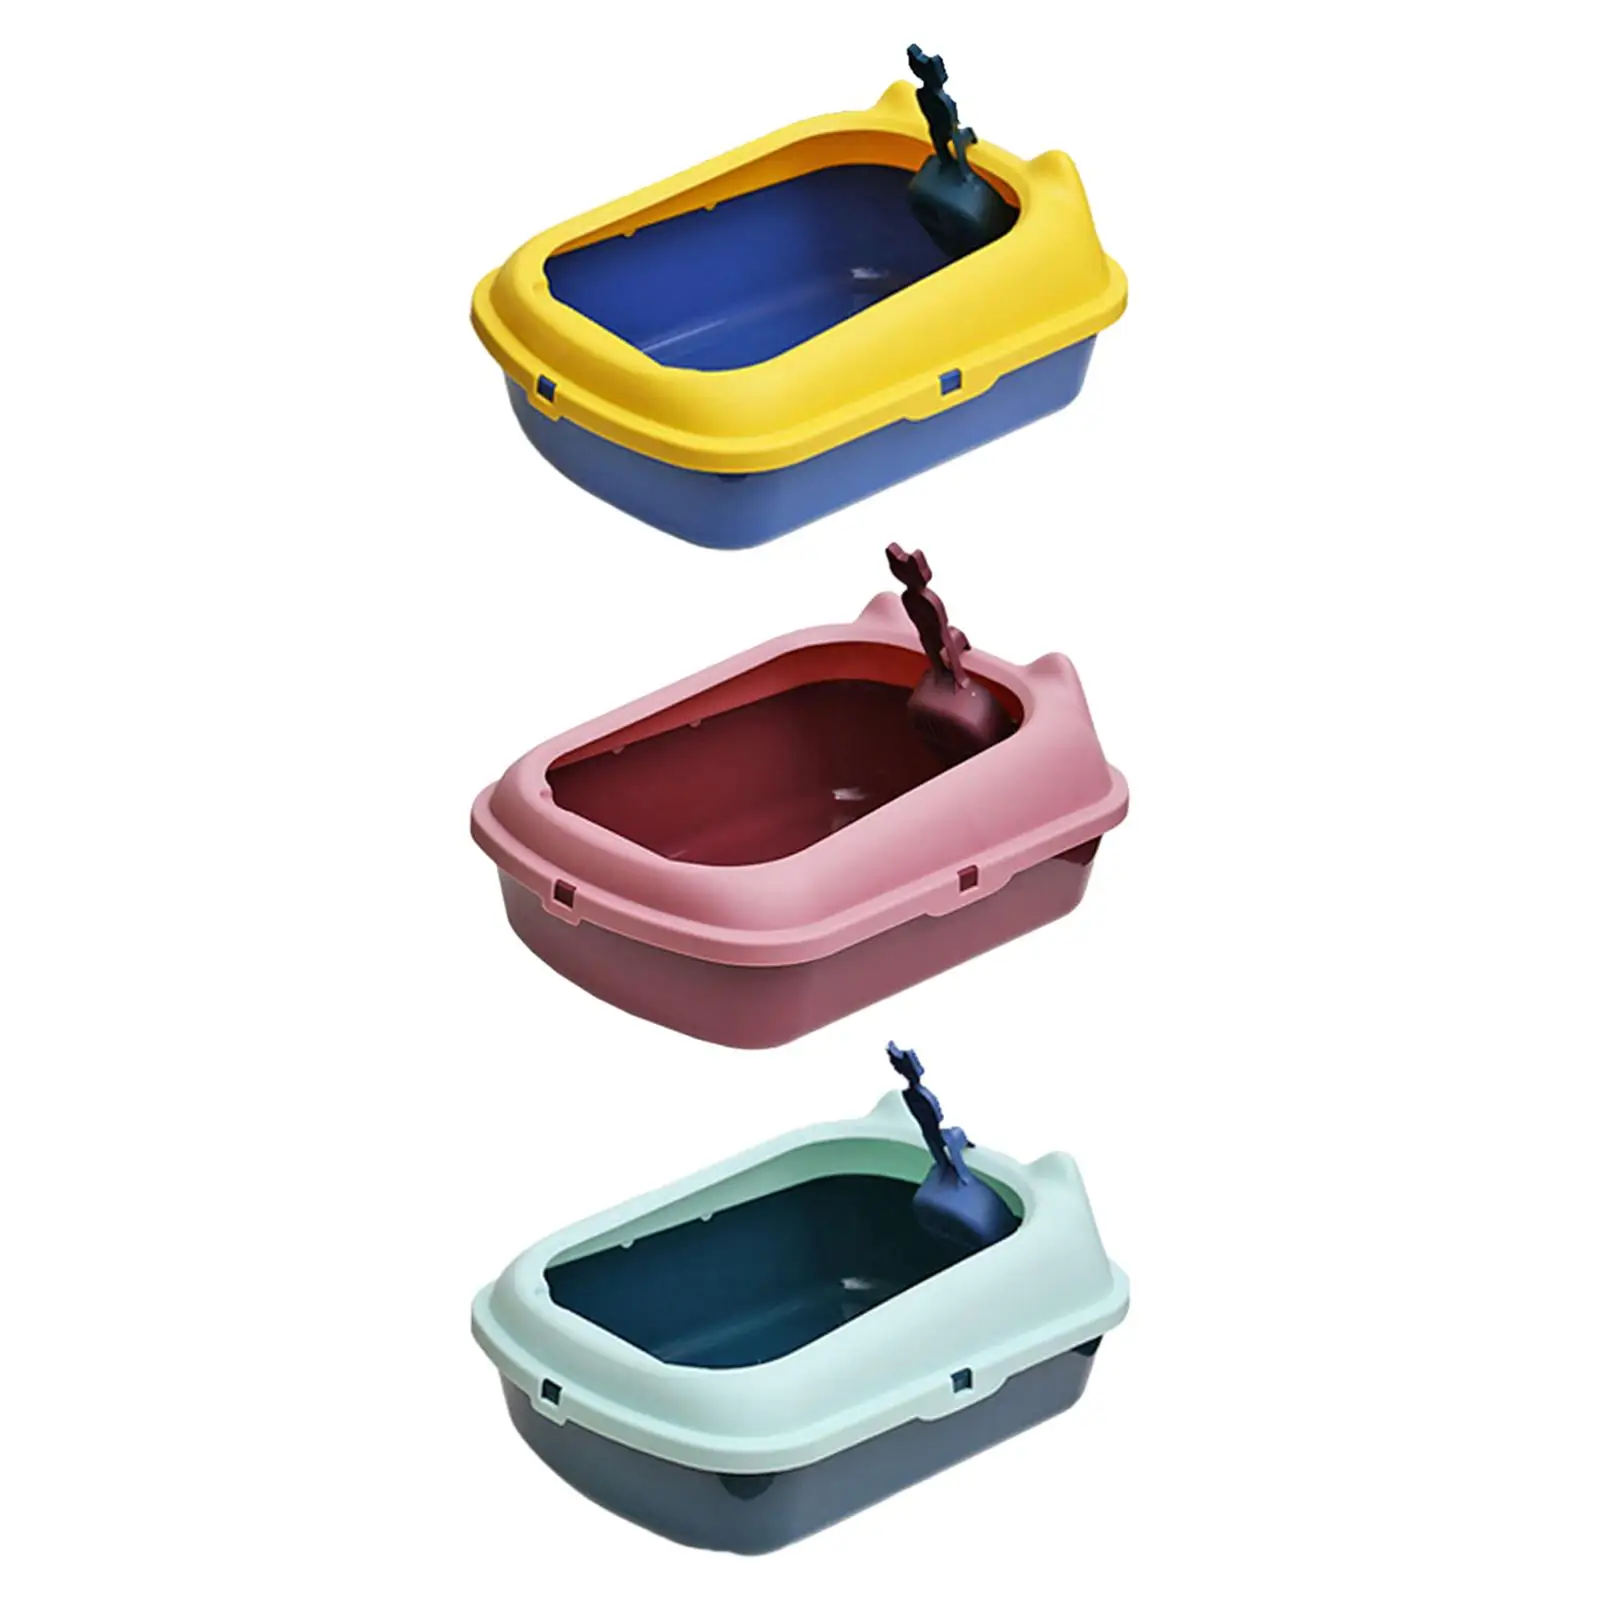 Open Top Pet Litter Tray Kitten Potty Toilet Portable Cat Sand Box Cat Litter Basin with High Side for All Kinds of Cat Litter